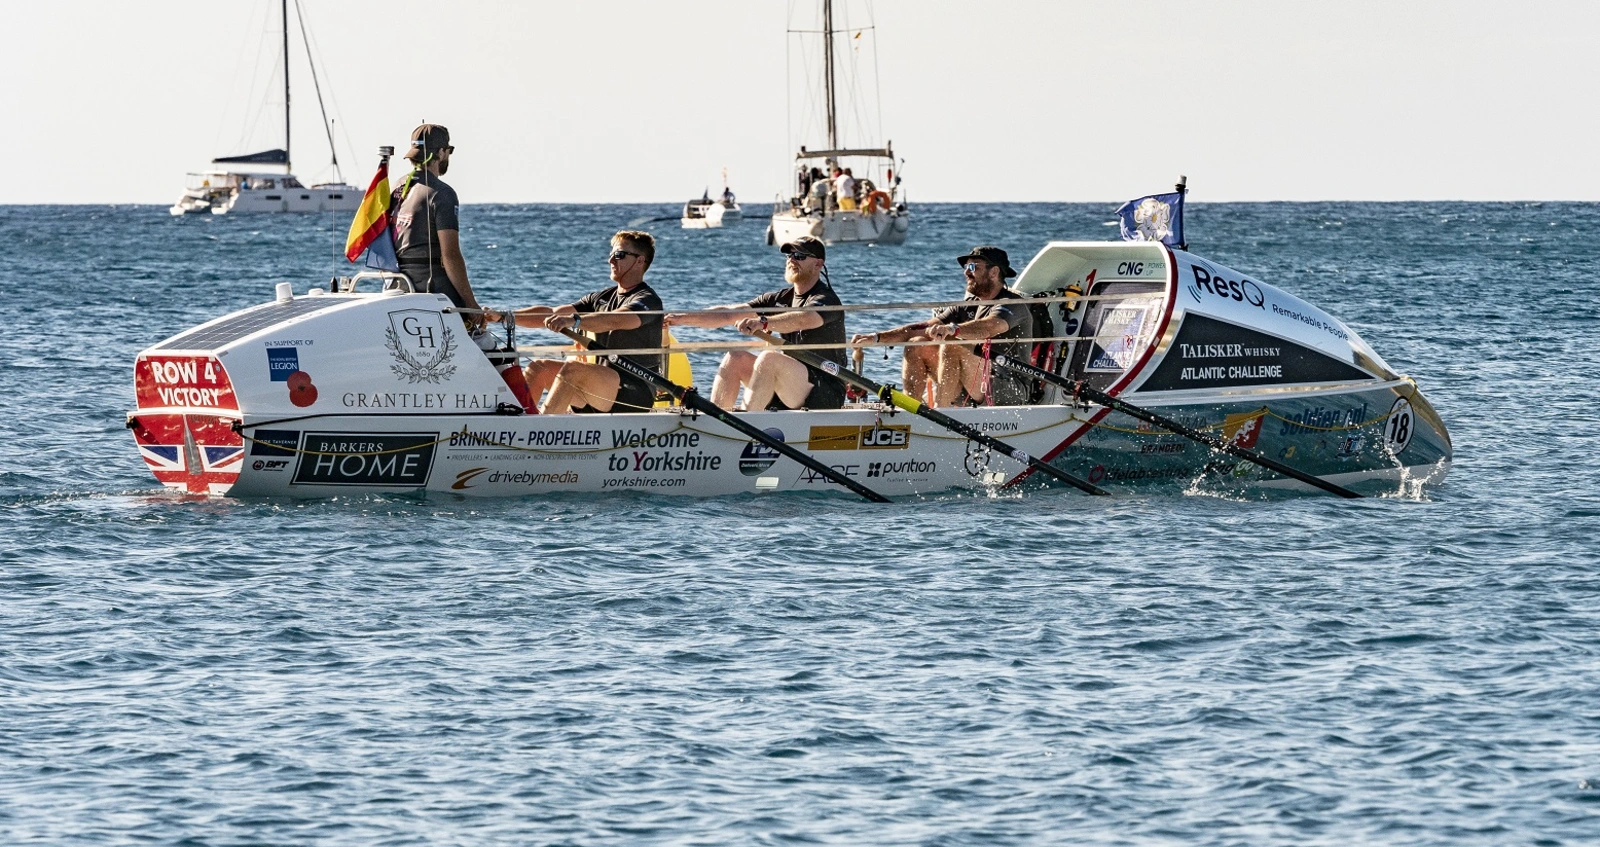 Row 4 Victory Team rowing out at sea